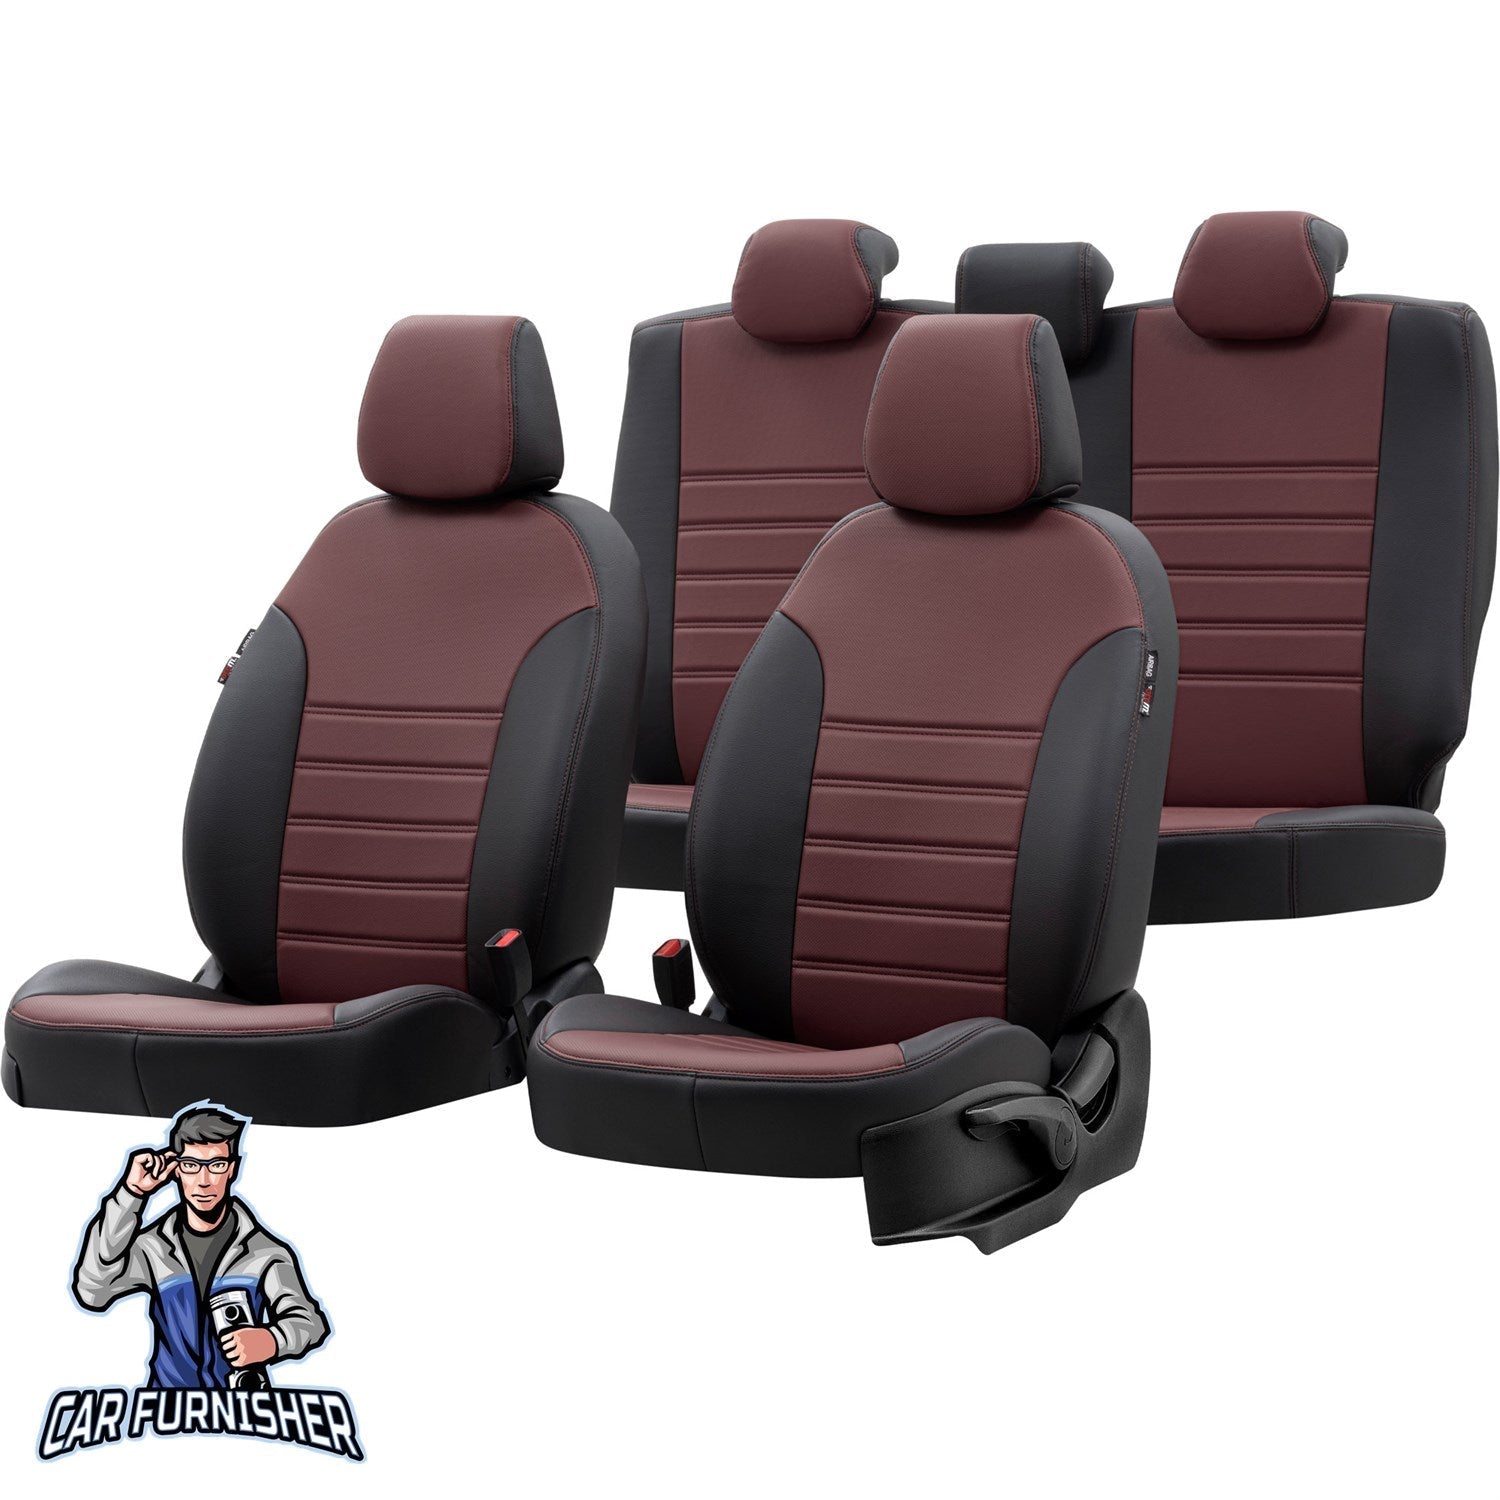 Volkswagen Caravelle Seat Cover Istanbul Leather Design Burgundy Leather